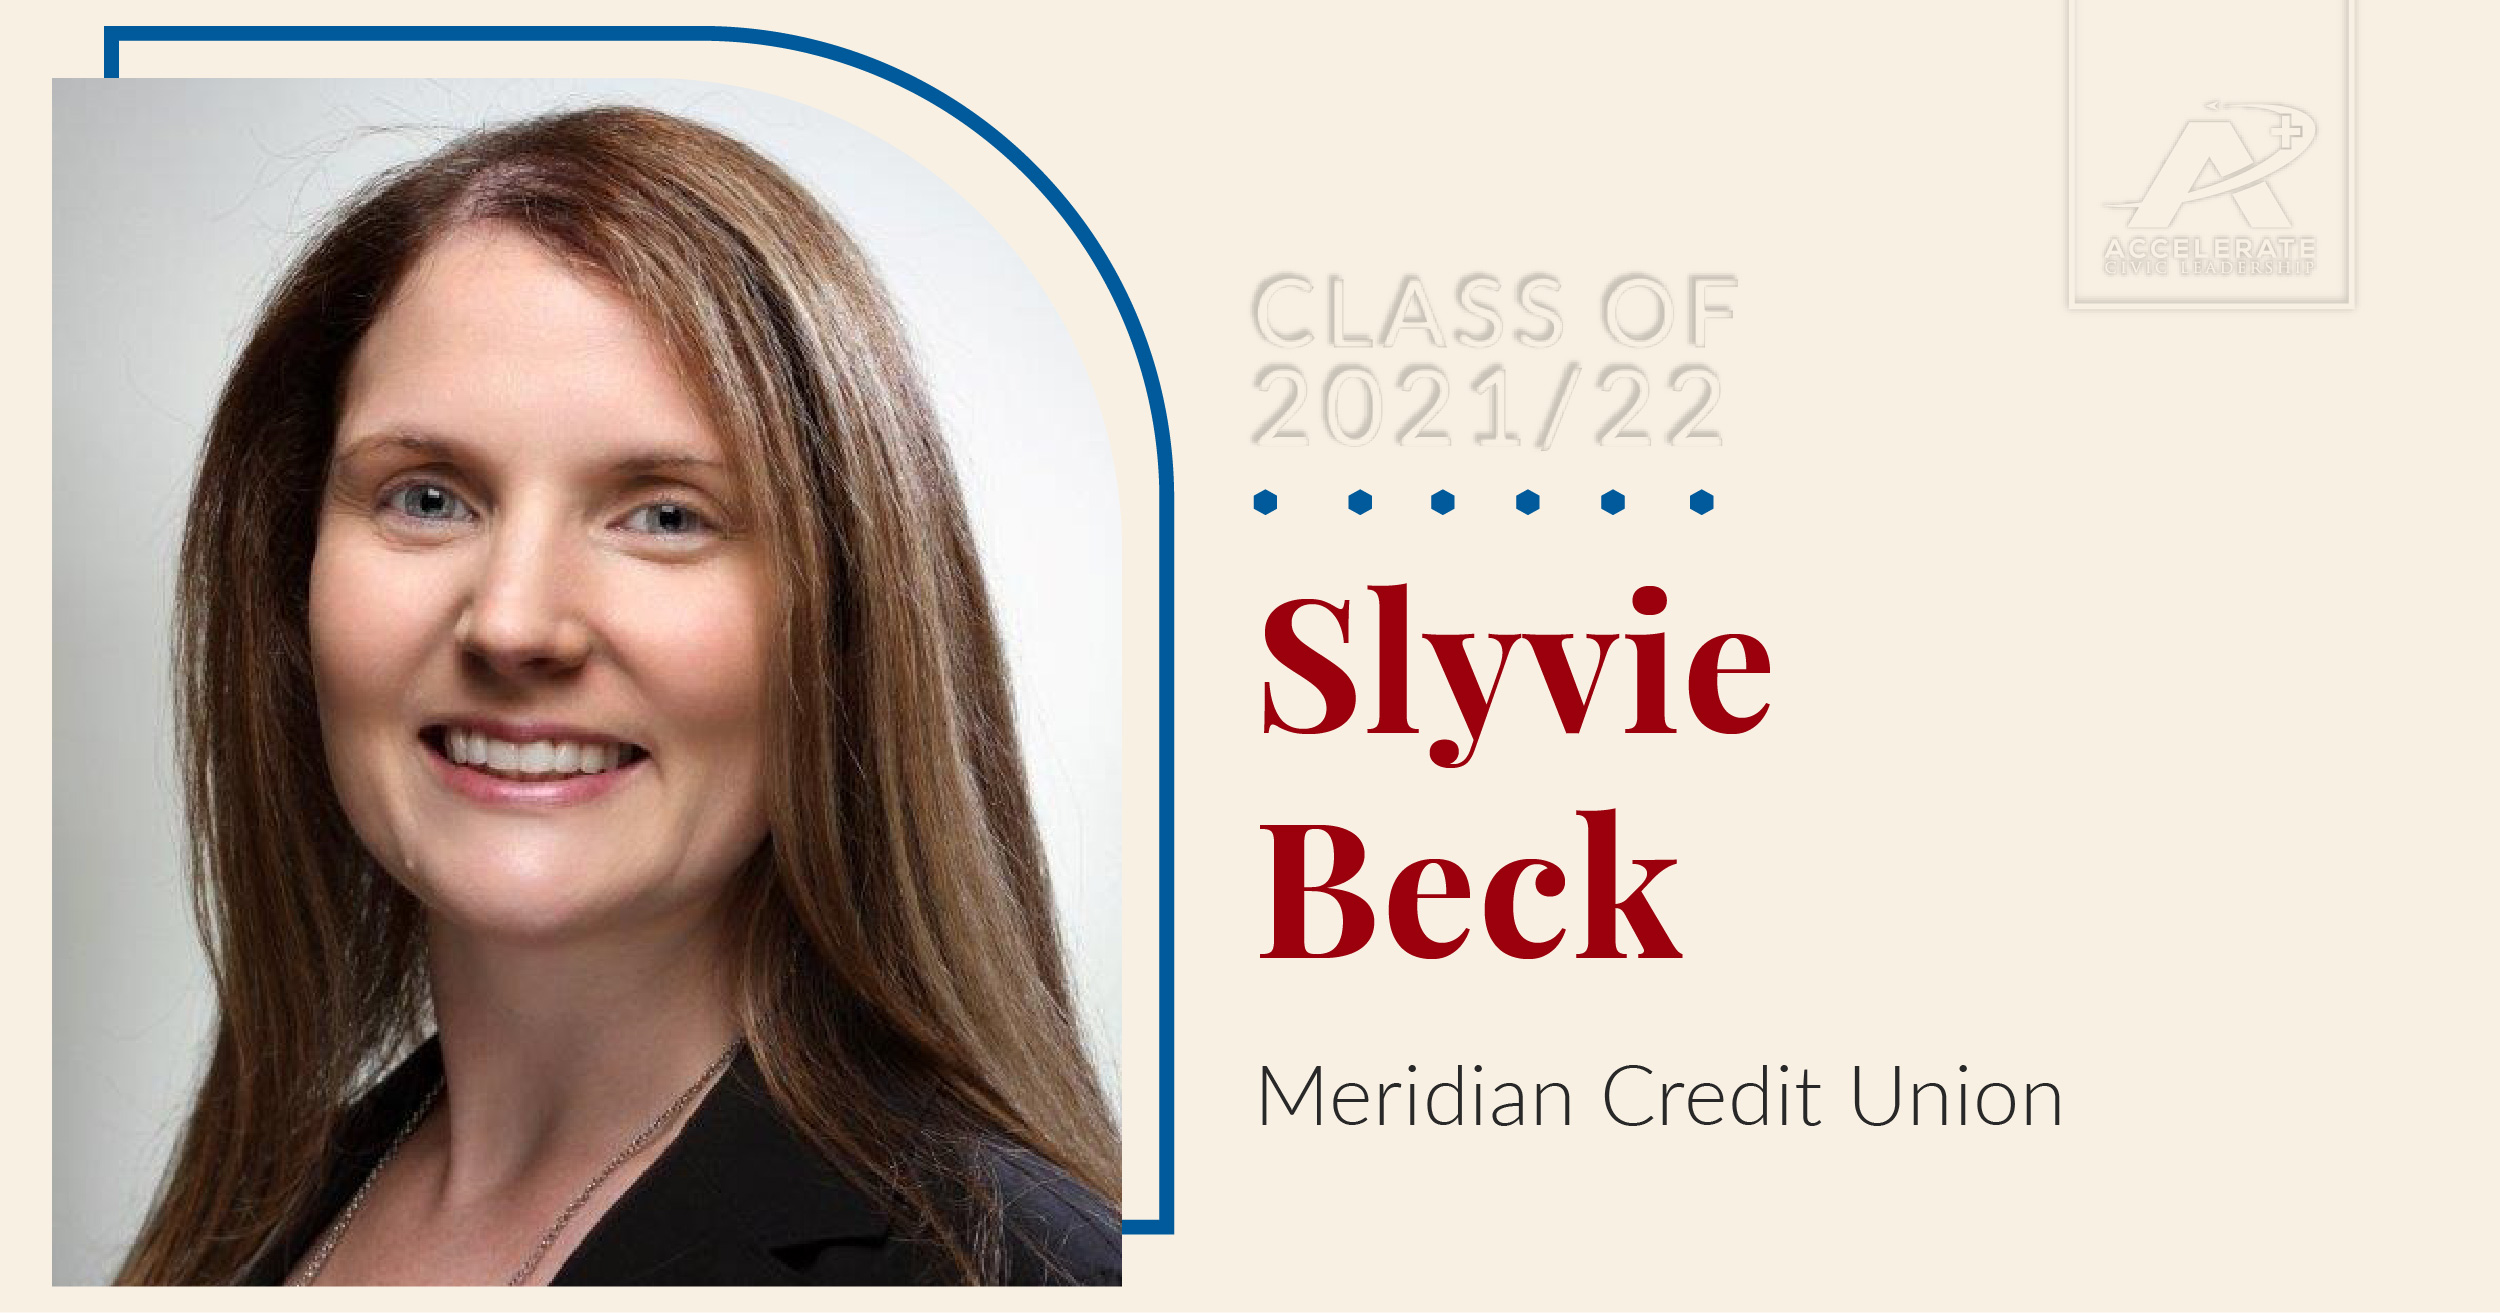 Leader Spotlight for Sylvie Beck, Assistant Manager of Operations Support for Meridian Credit Union